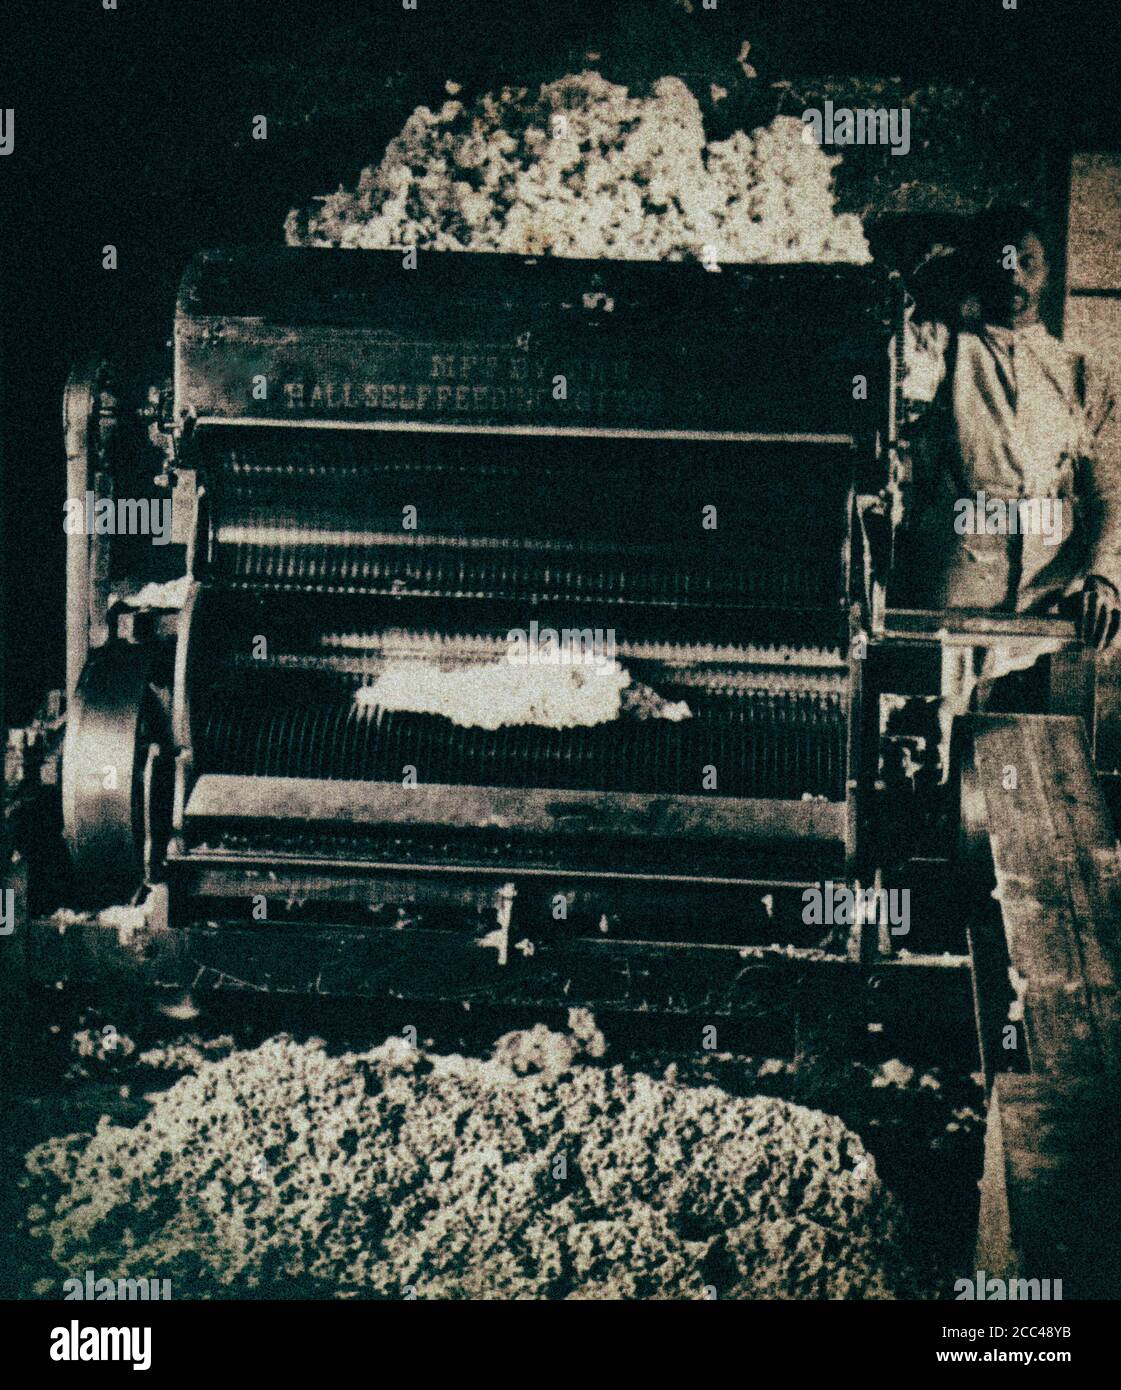 Man in front of a machine to shell cotton. USA. 1890 Stock Photo